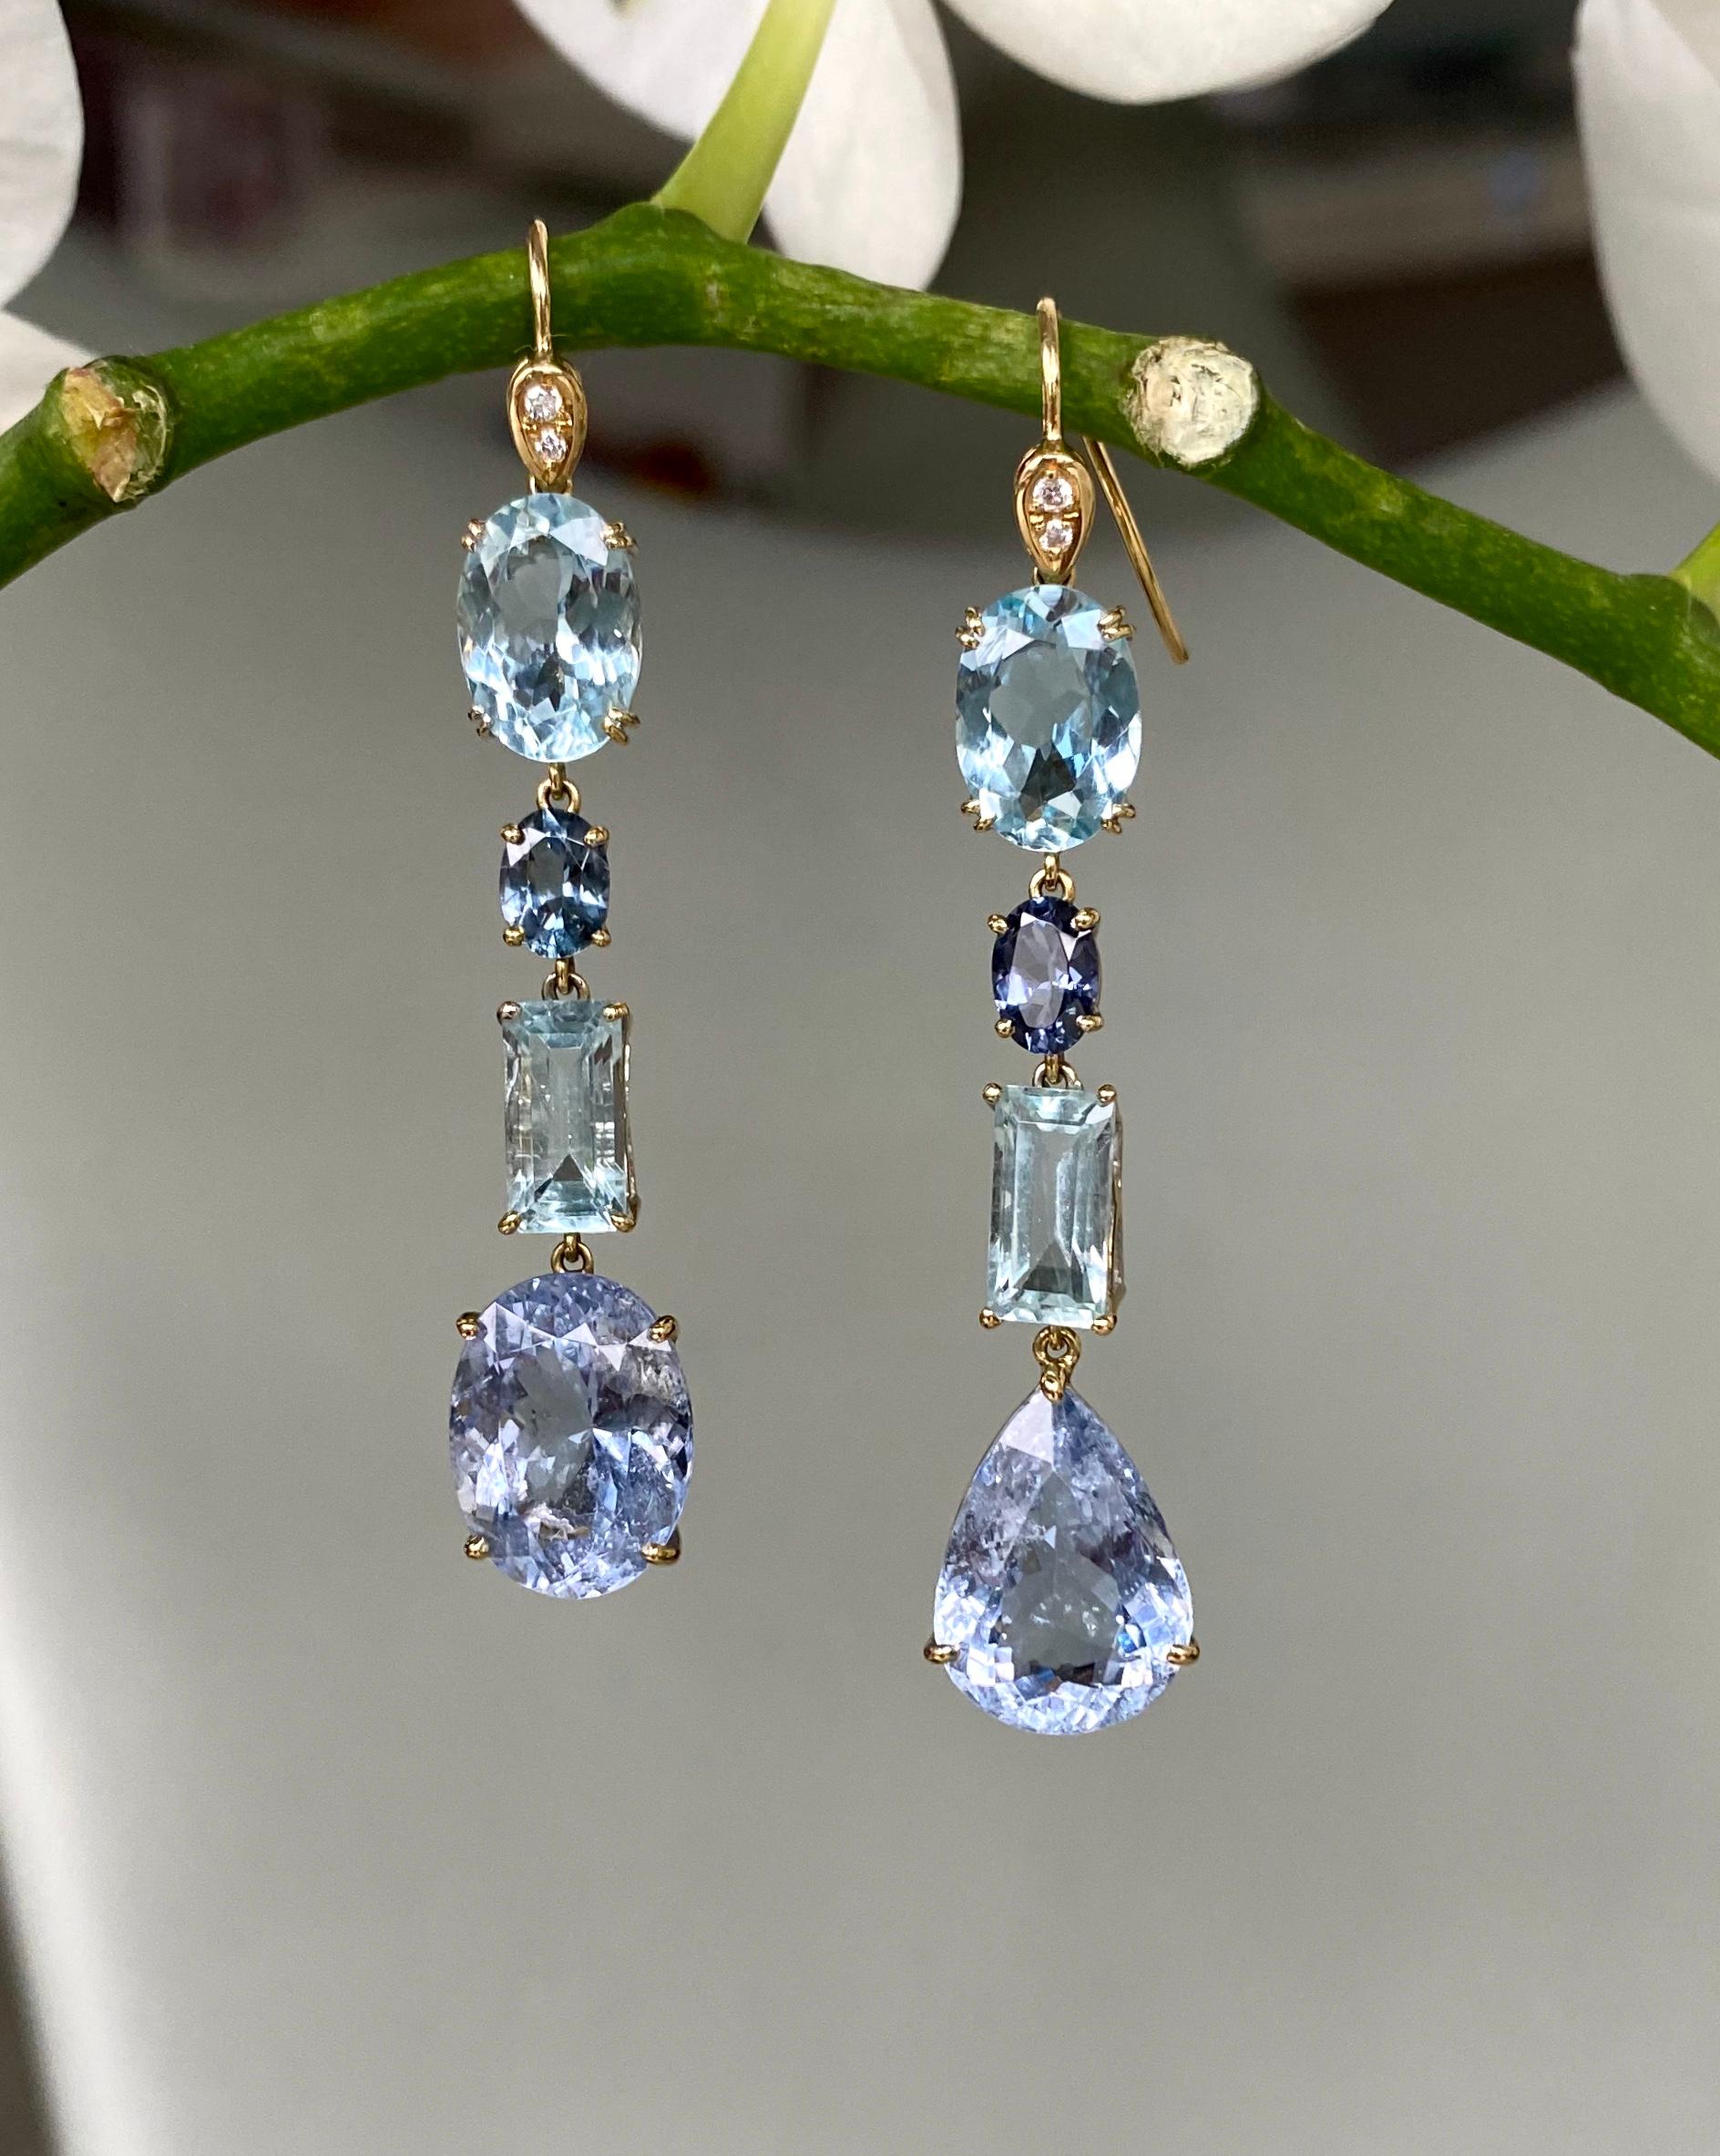 One-of-a-kind dangle earrings of faceted multi-shaped aquamarines, blue beryls and diamonds, handcrafted in 18 karat yellow gold.

These sparkling earrings in gorgeous shades of blue are purposely 